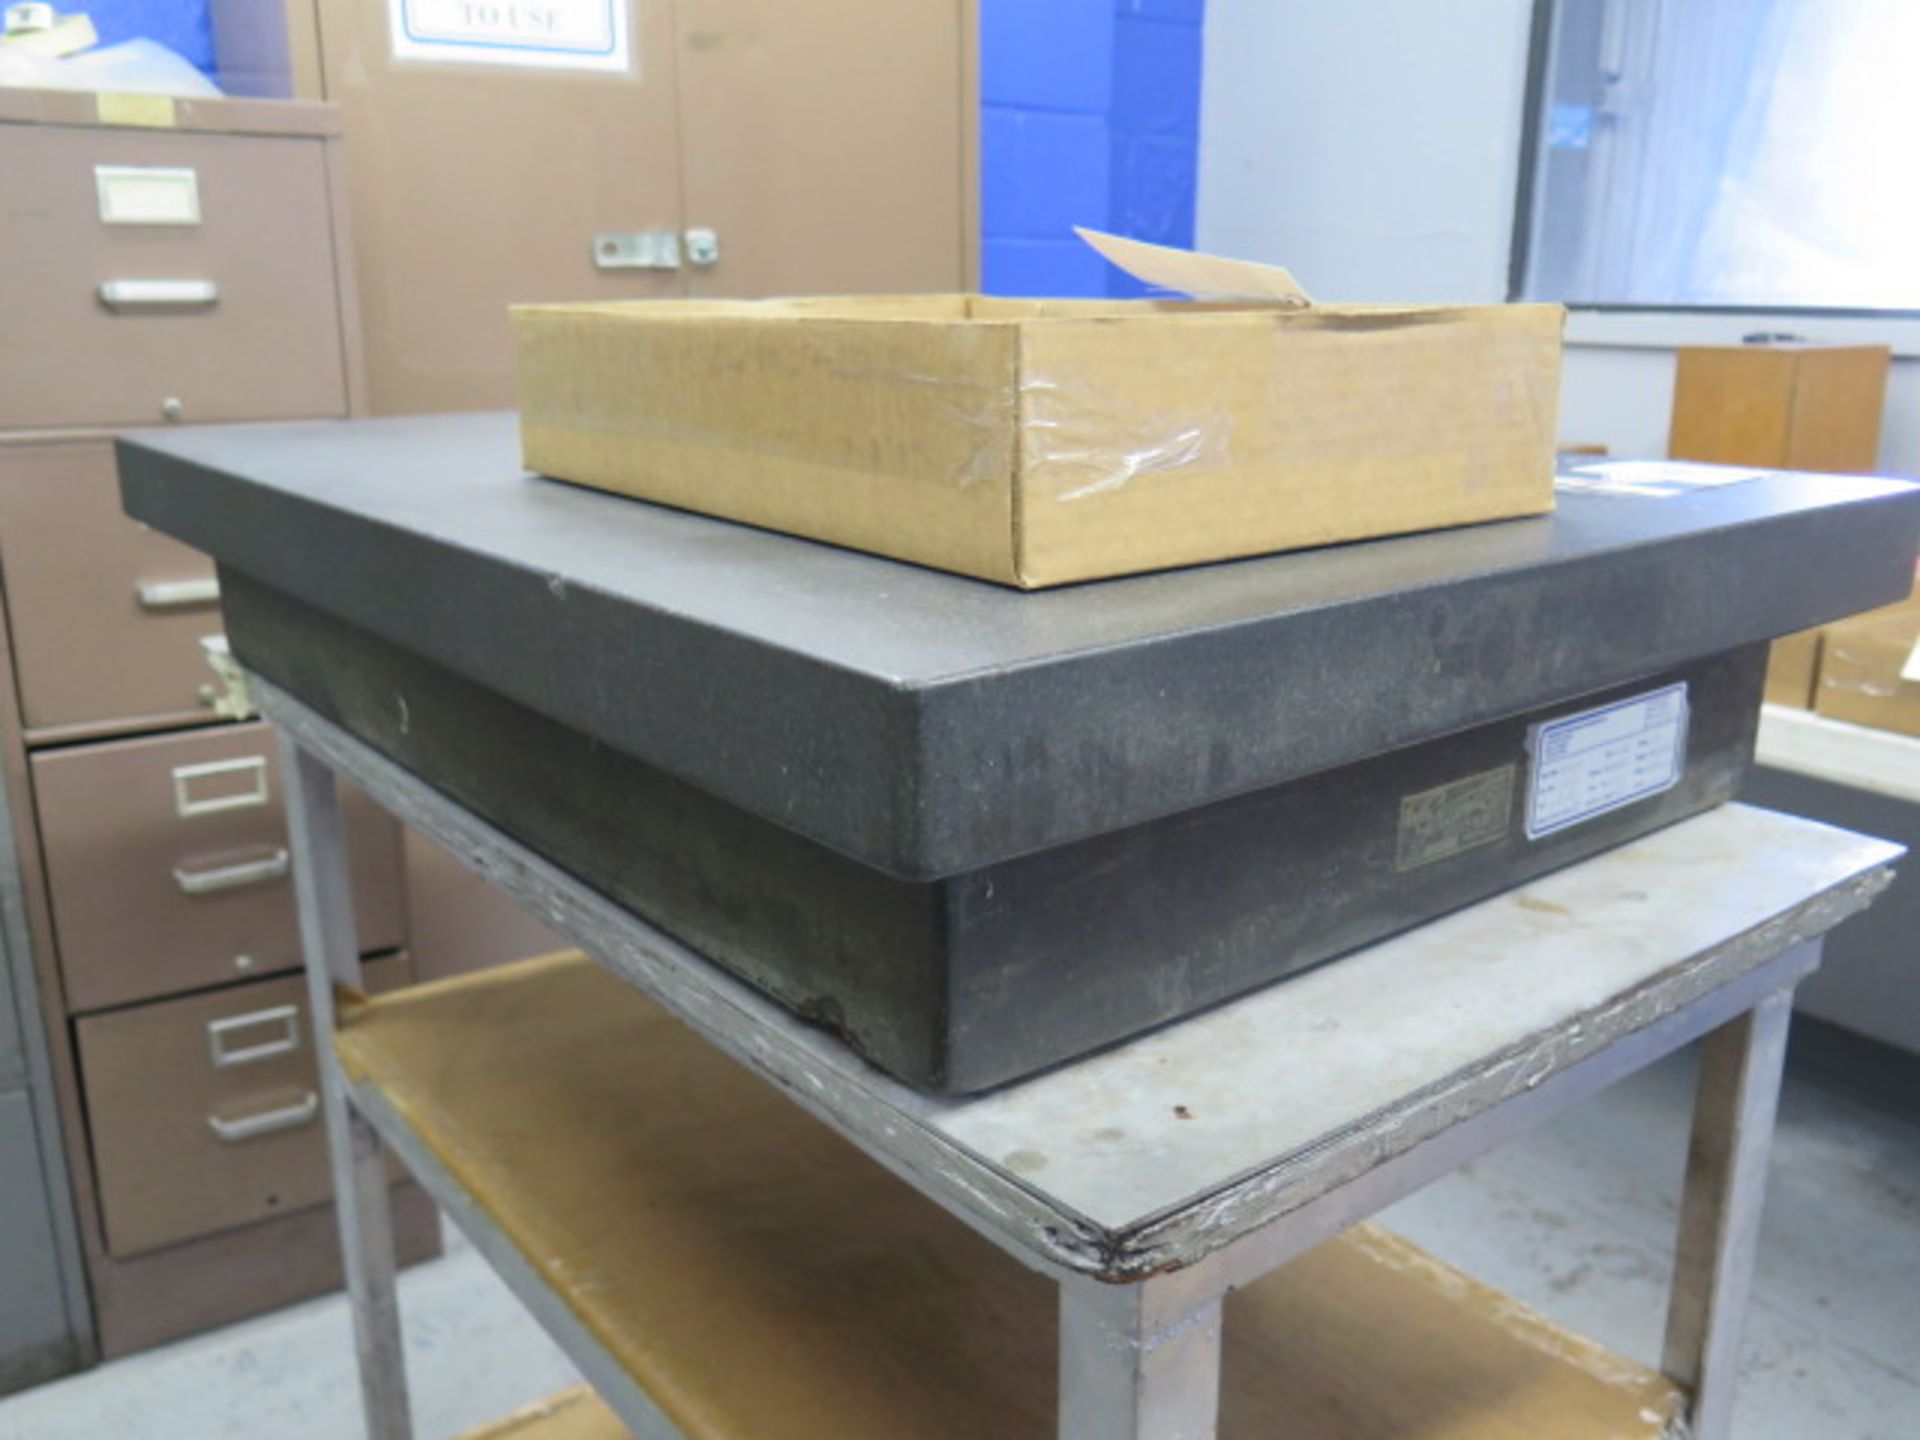 Rahn 24” x 36” x 6” Grade “A” 4-Ledge Granite Surface Plate w/ Rolling Stand (SOLD AS-IS - NO - Image 3 of 6